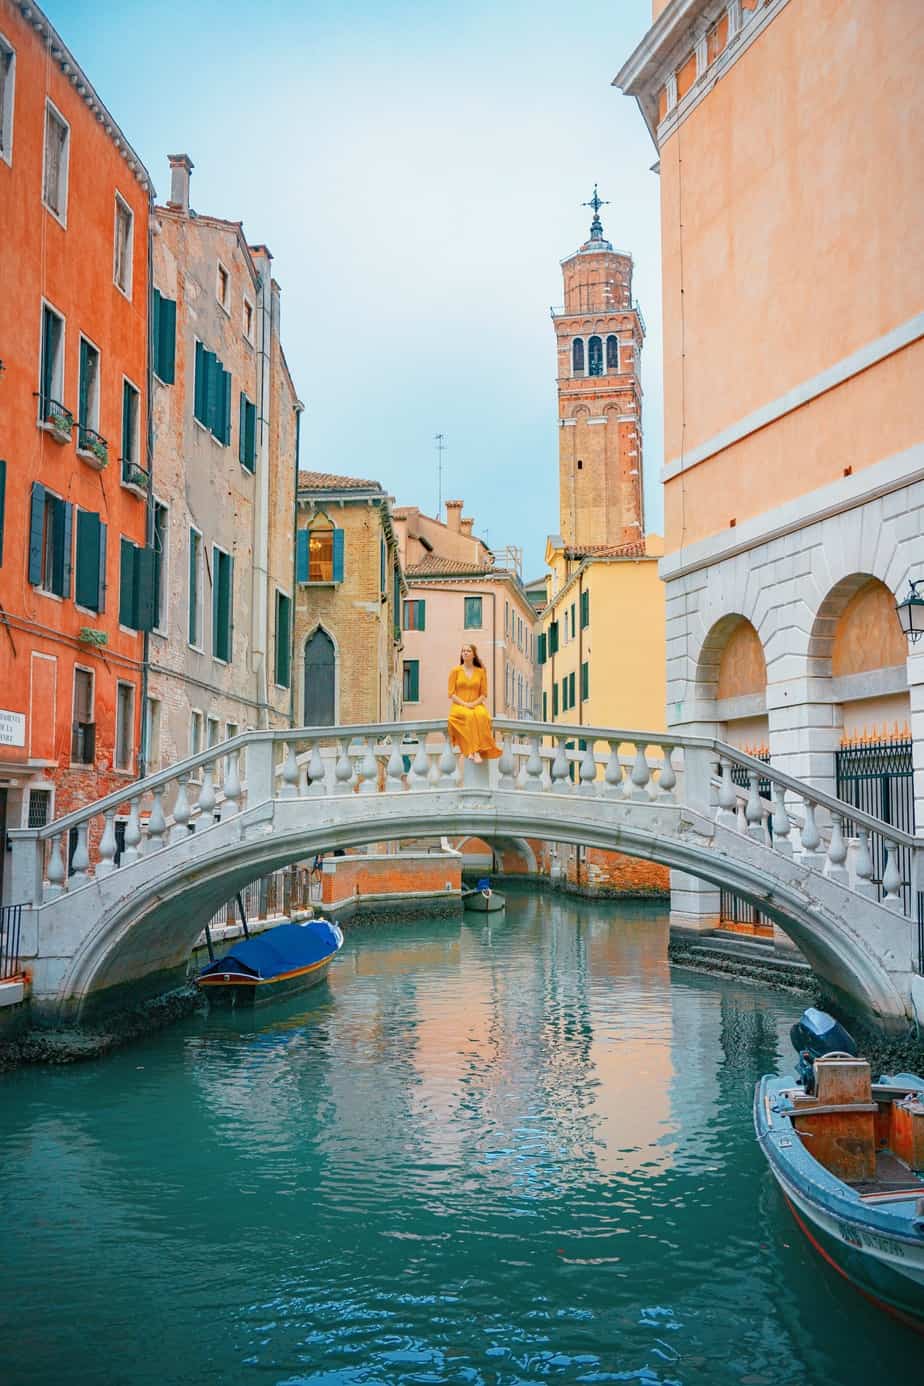 The Ponte Maria Callas is one of the most secret Instagram spots in Venice Italy | Venice photos locations that are secret | Instagram spots in Venice | hidden Instagram spots in Venice | where to take photos in Venice | Venice italy travel tips